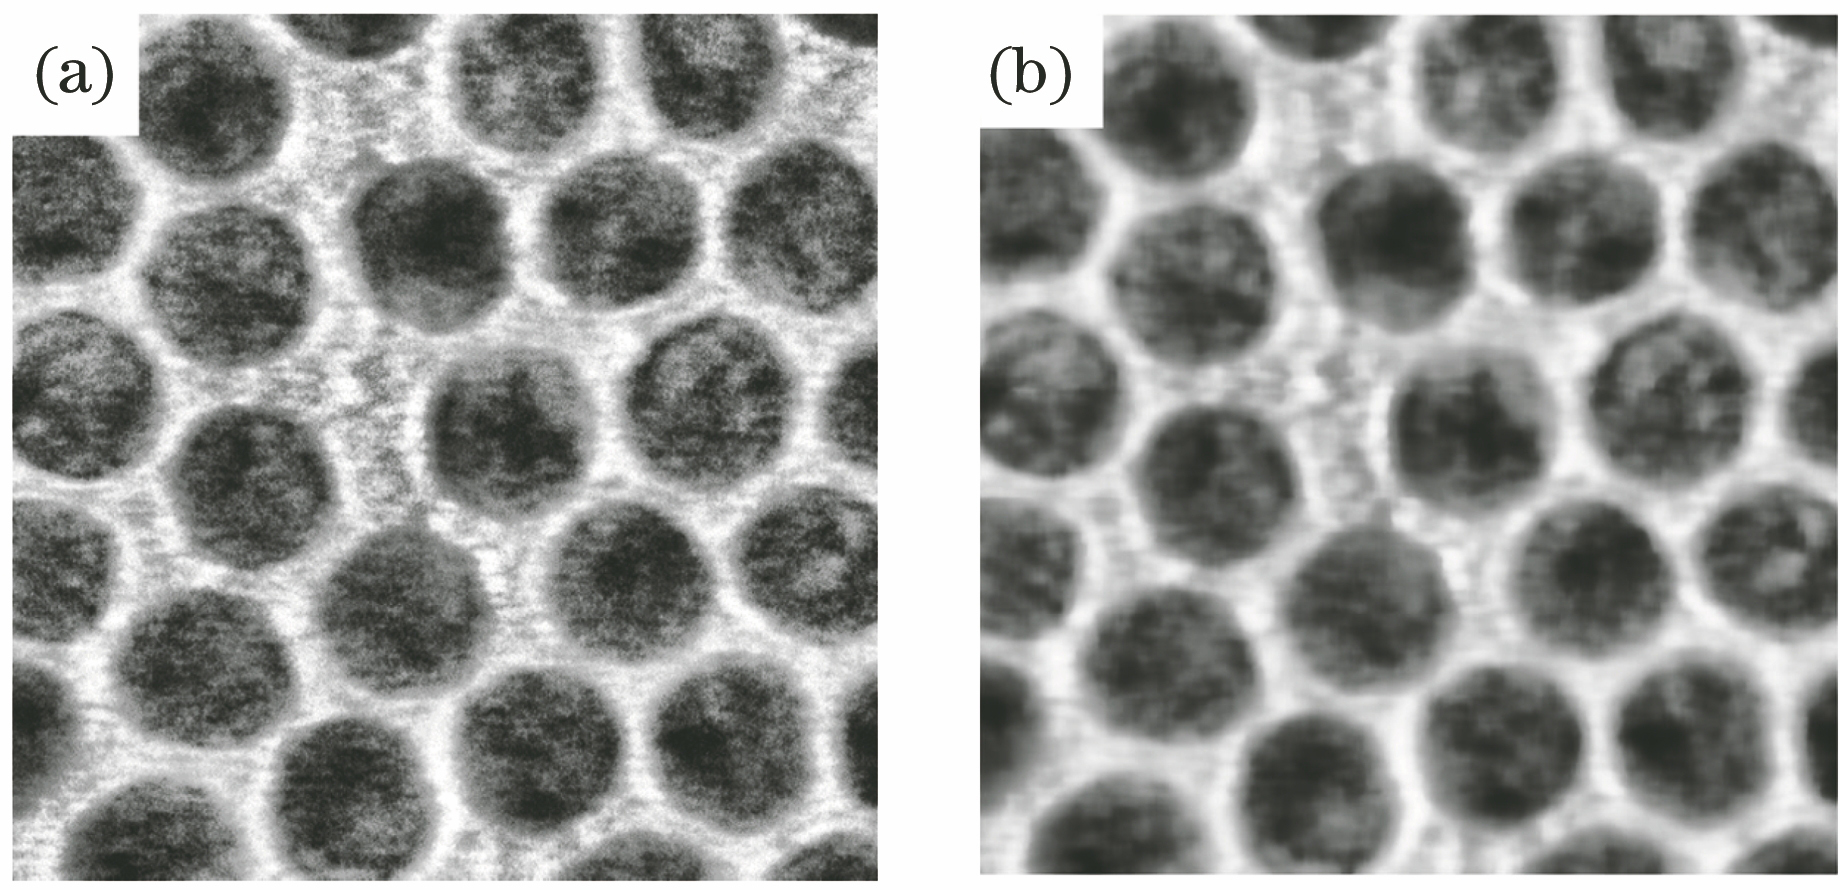 Filtering results by partial differential equation. (a) Original nanoparticle image; (b) filtering result